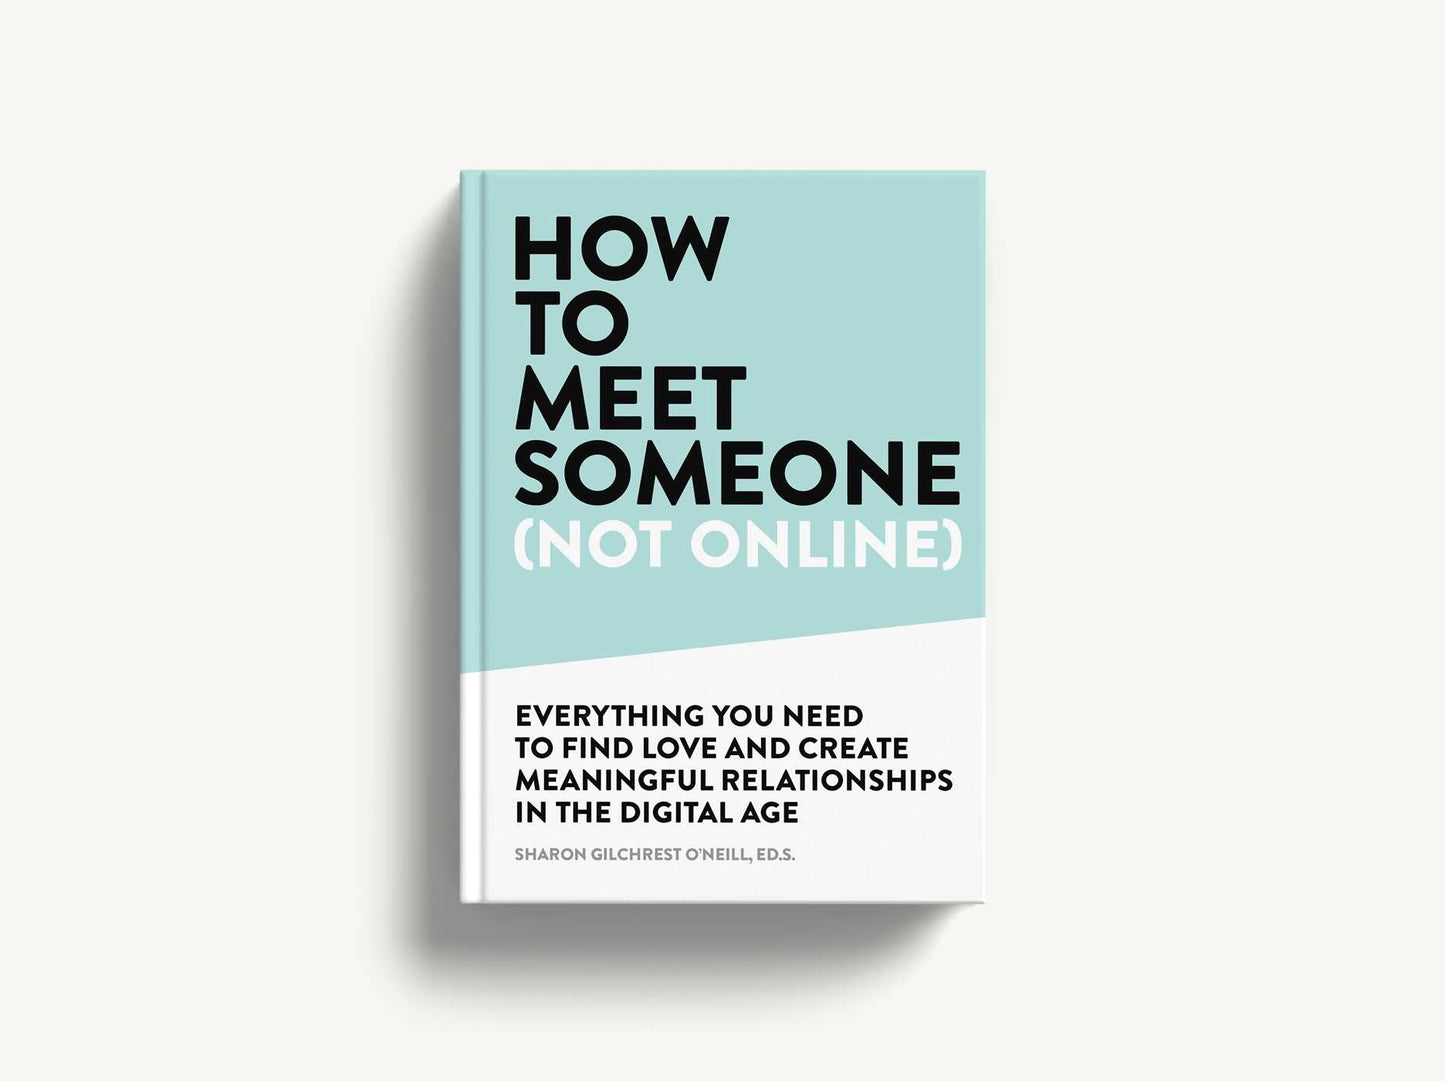 How to Meet Someone (Not Online): Create More Meaningful Relationships Offline